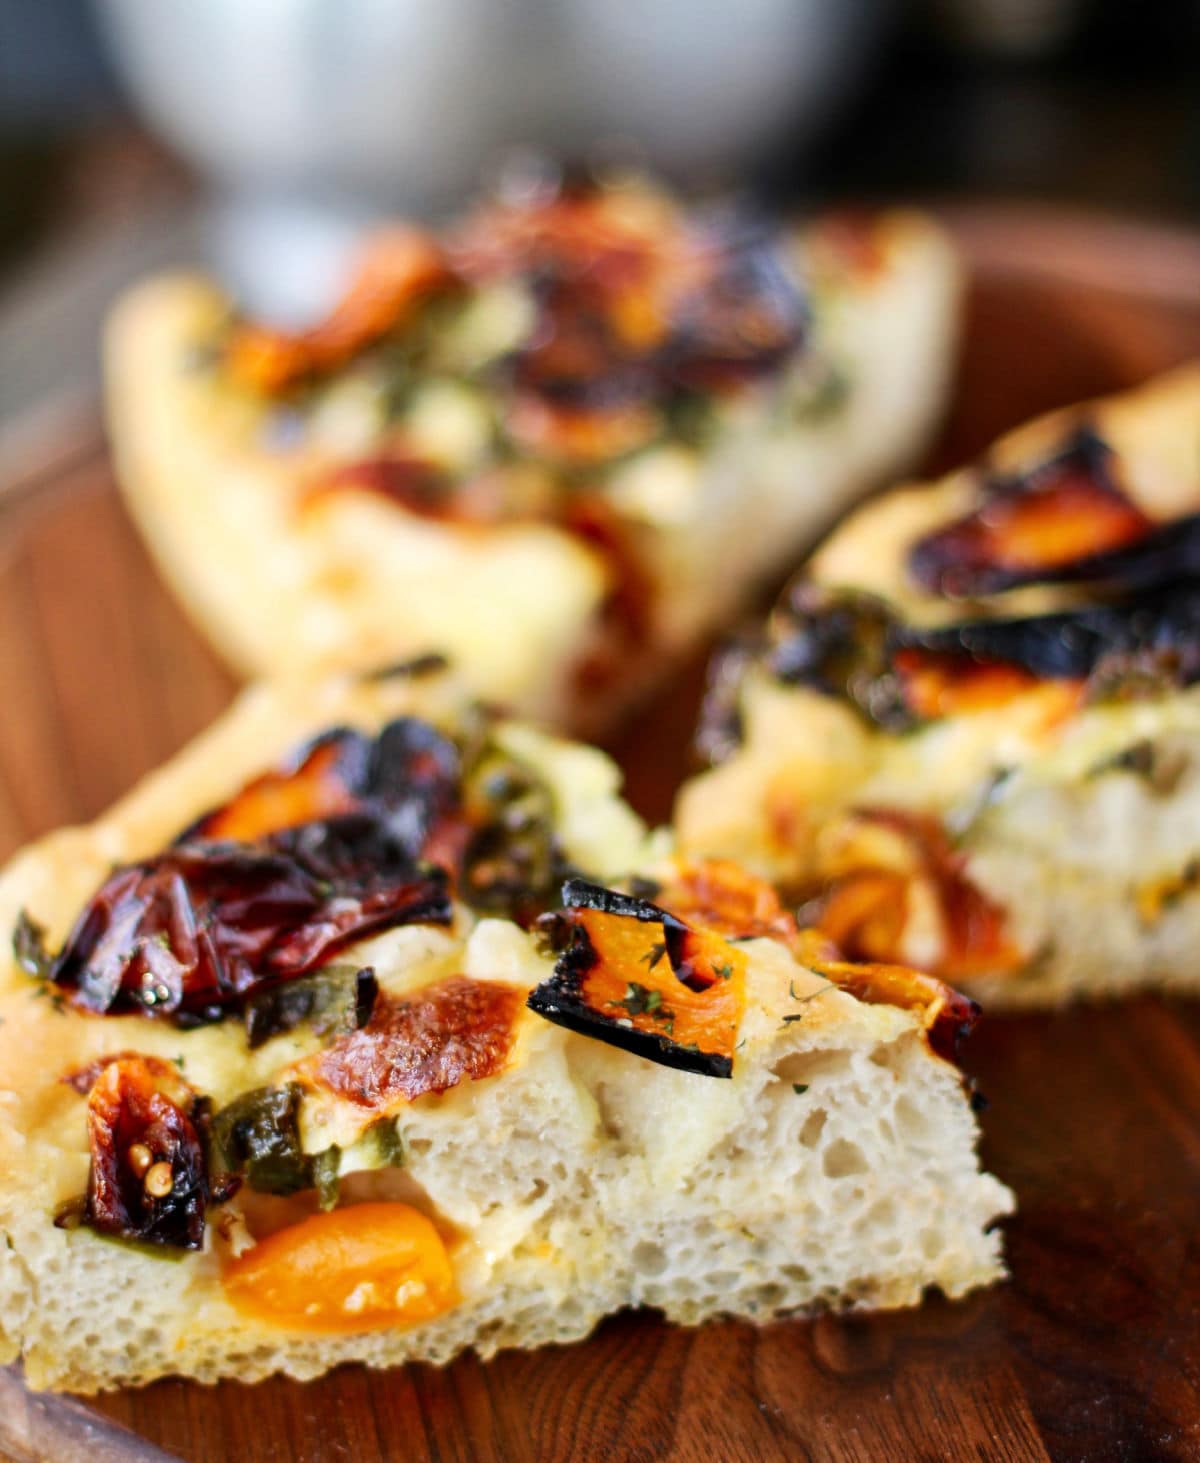 Roasted Pepper and Chile Focaccia baked.